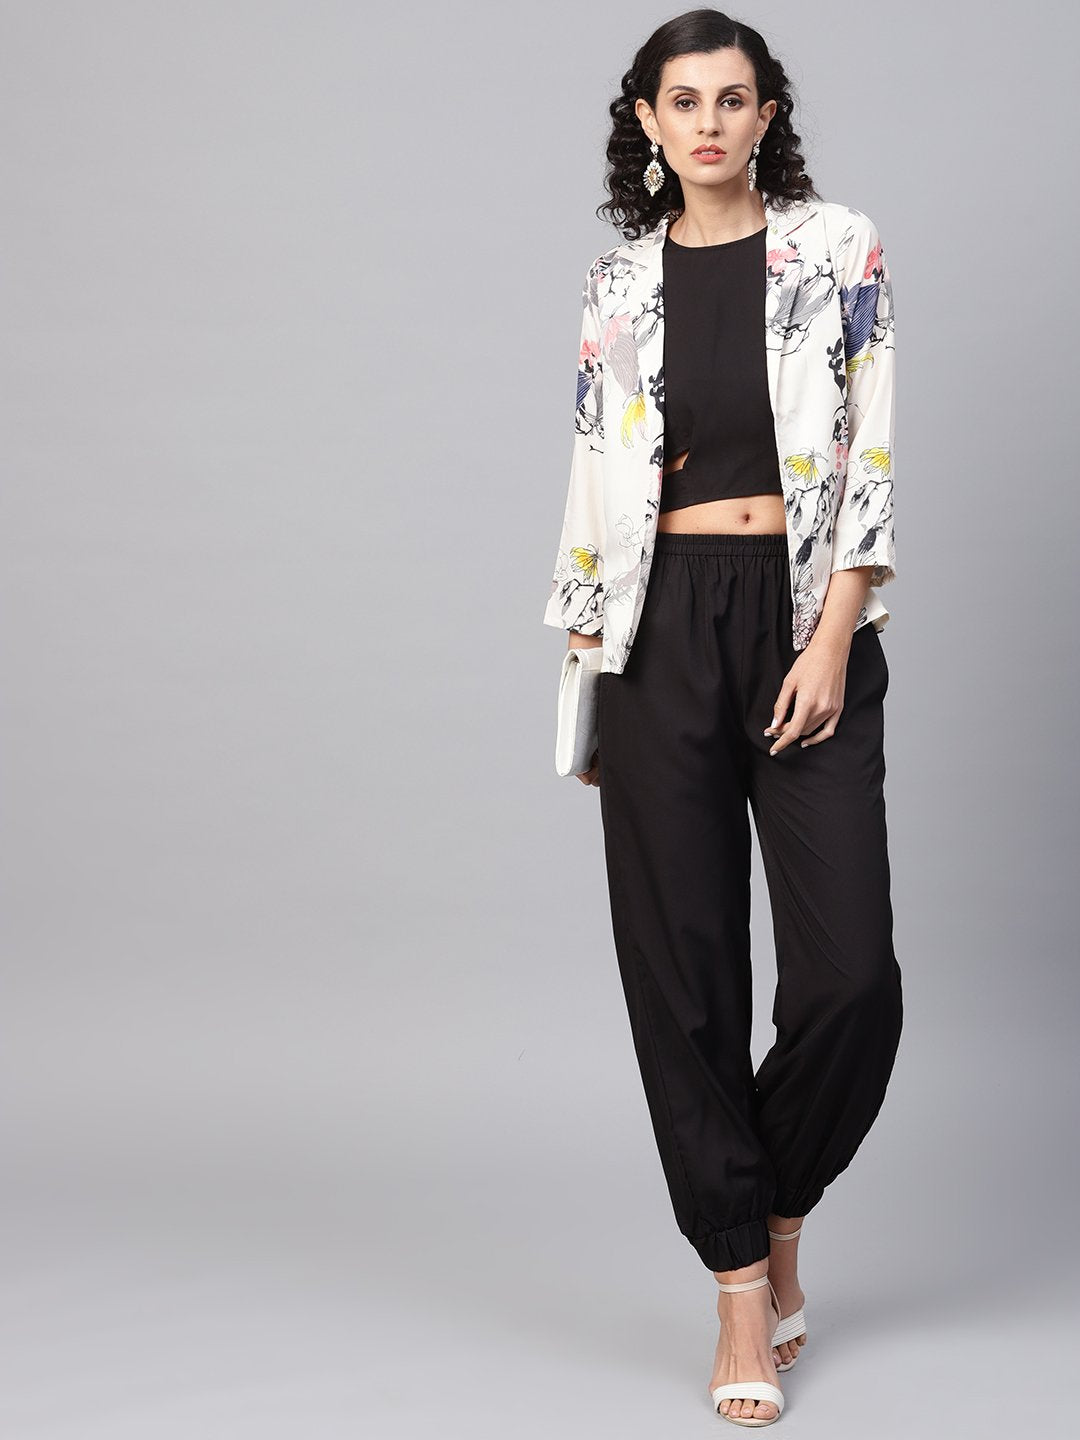 Women's Solid Black Tops And Palazzo With Cream Floral Printed Jacket - Nayo Clothing